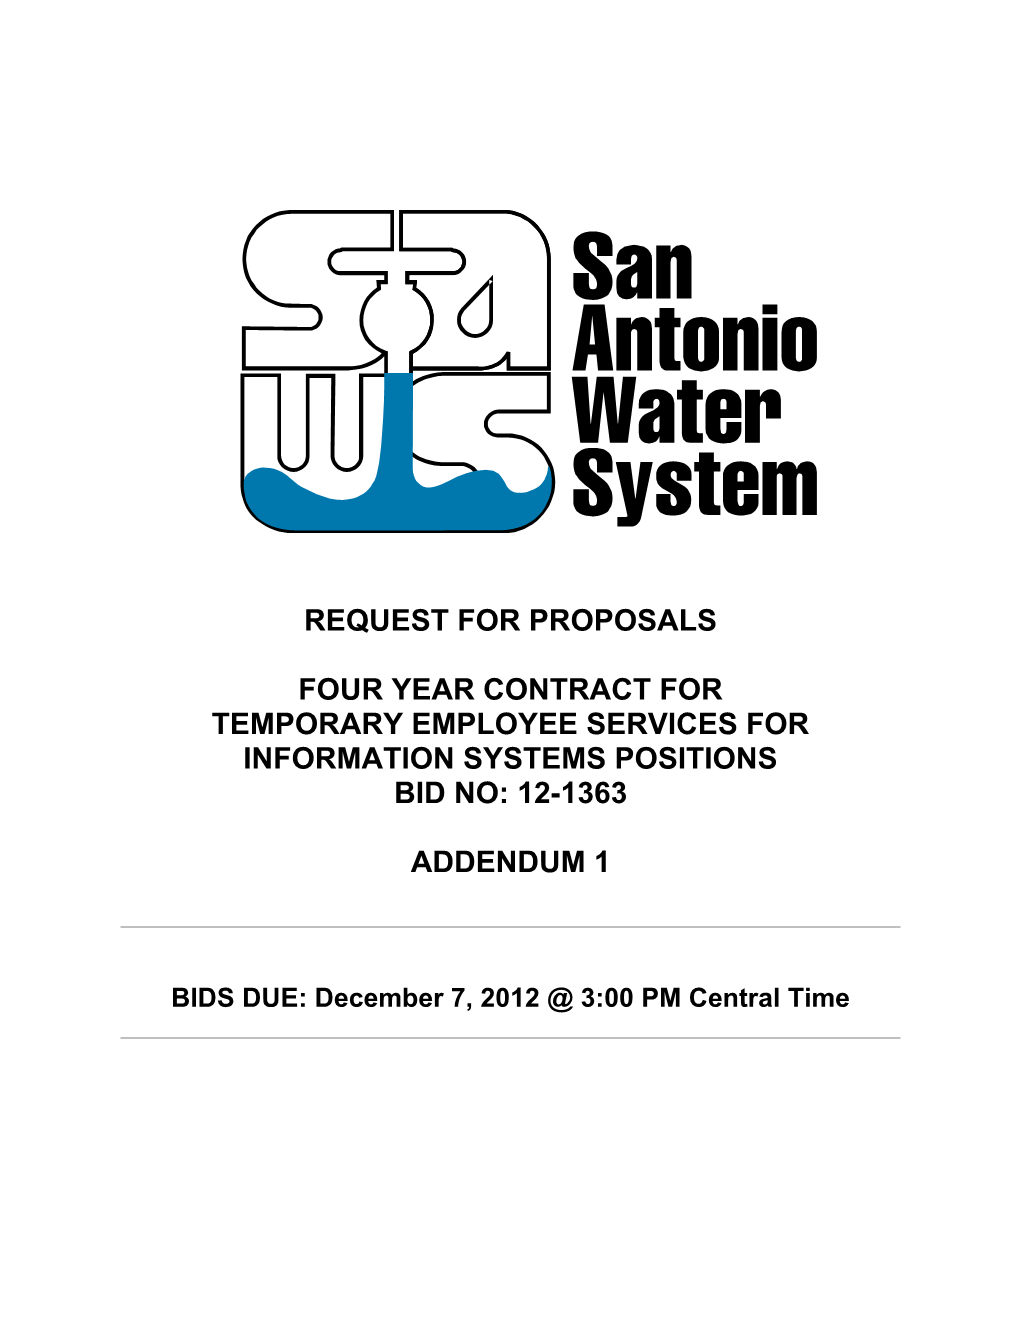 Temporary Employee Services for Information Systems Positions